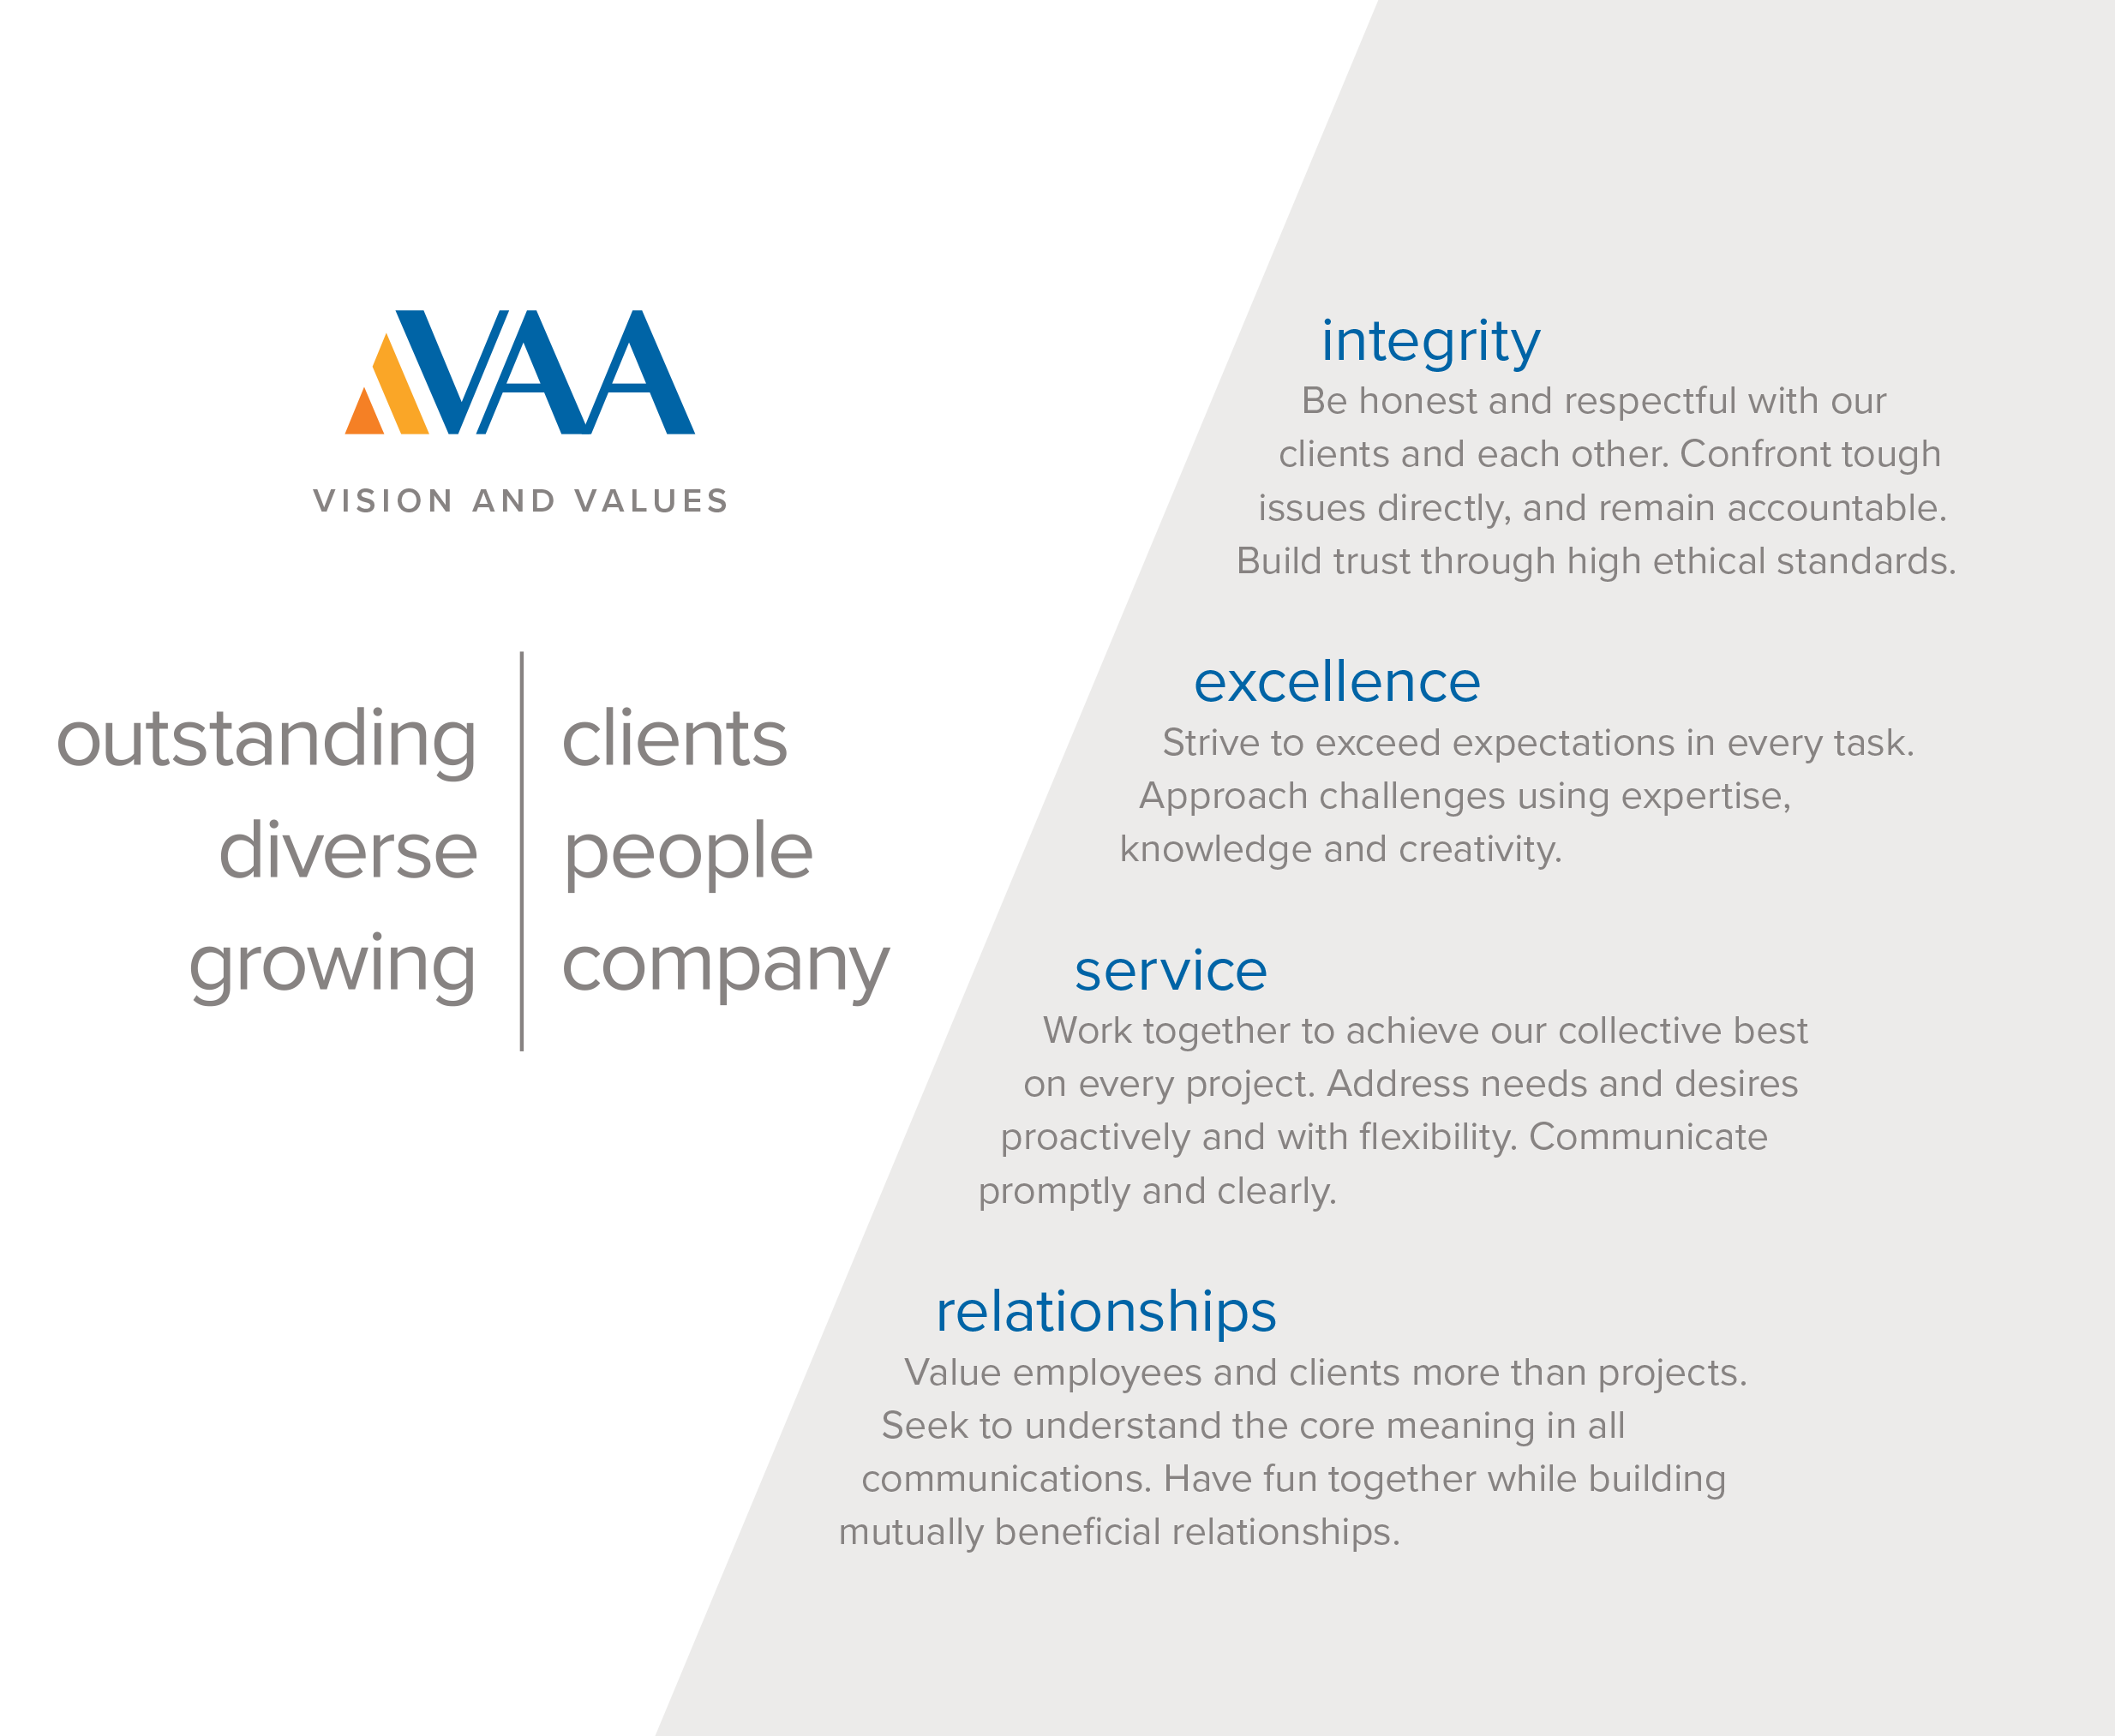 VAA Vision and Values, including integrity, excellence, service, and relationships